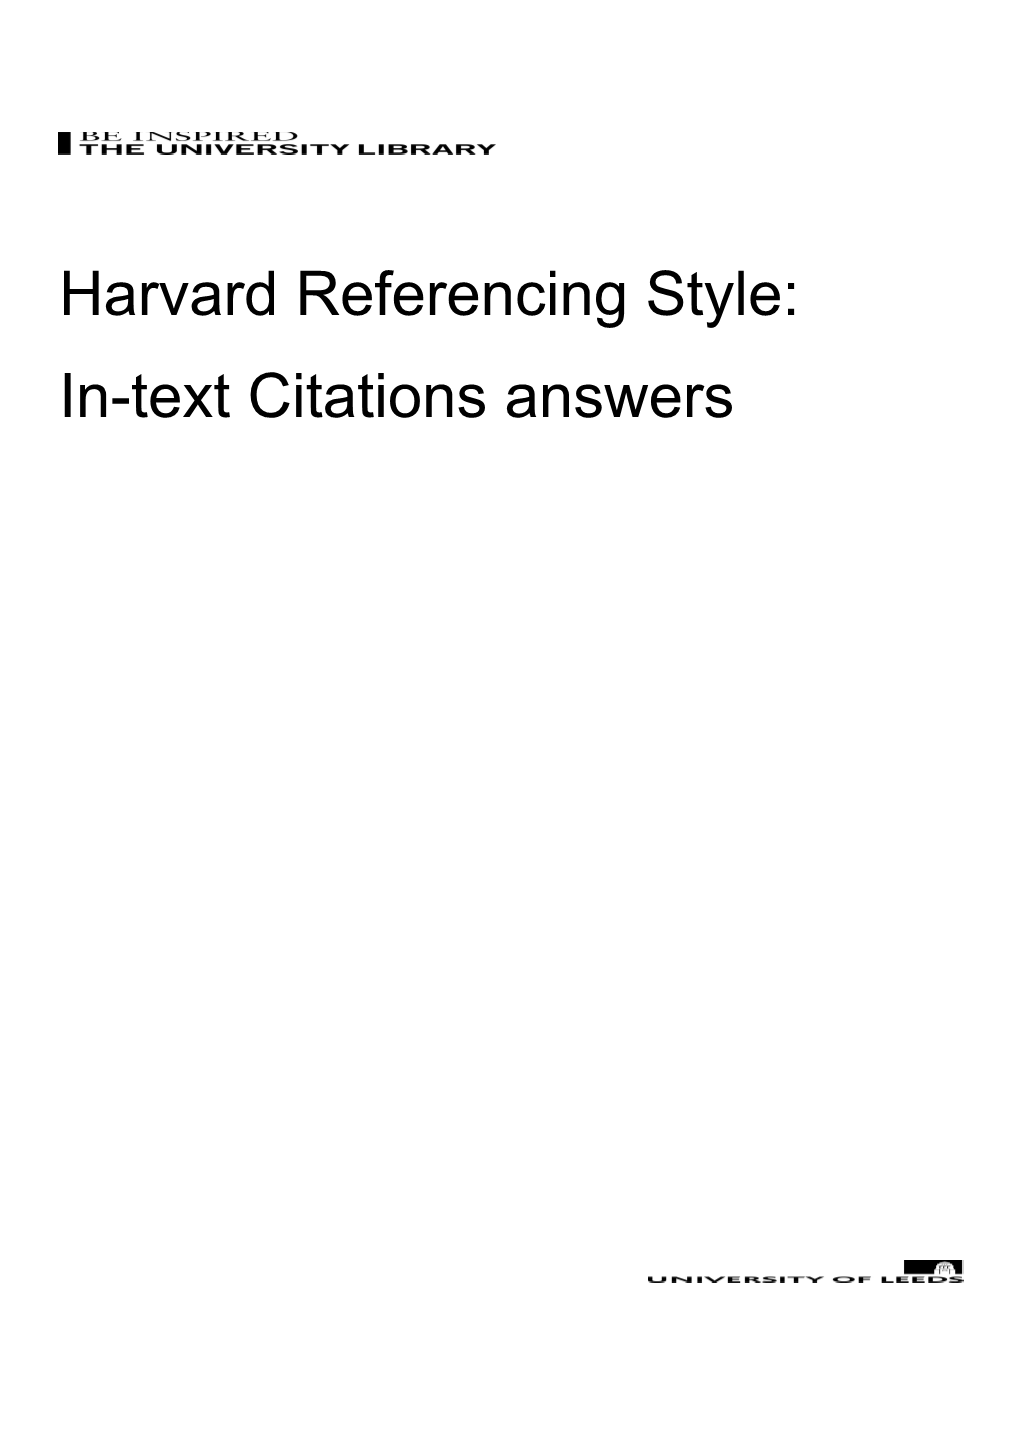 Harvard Referencing Style